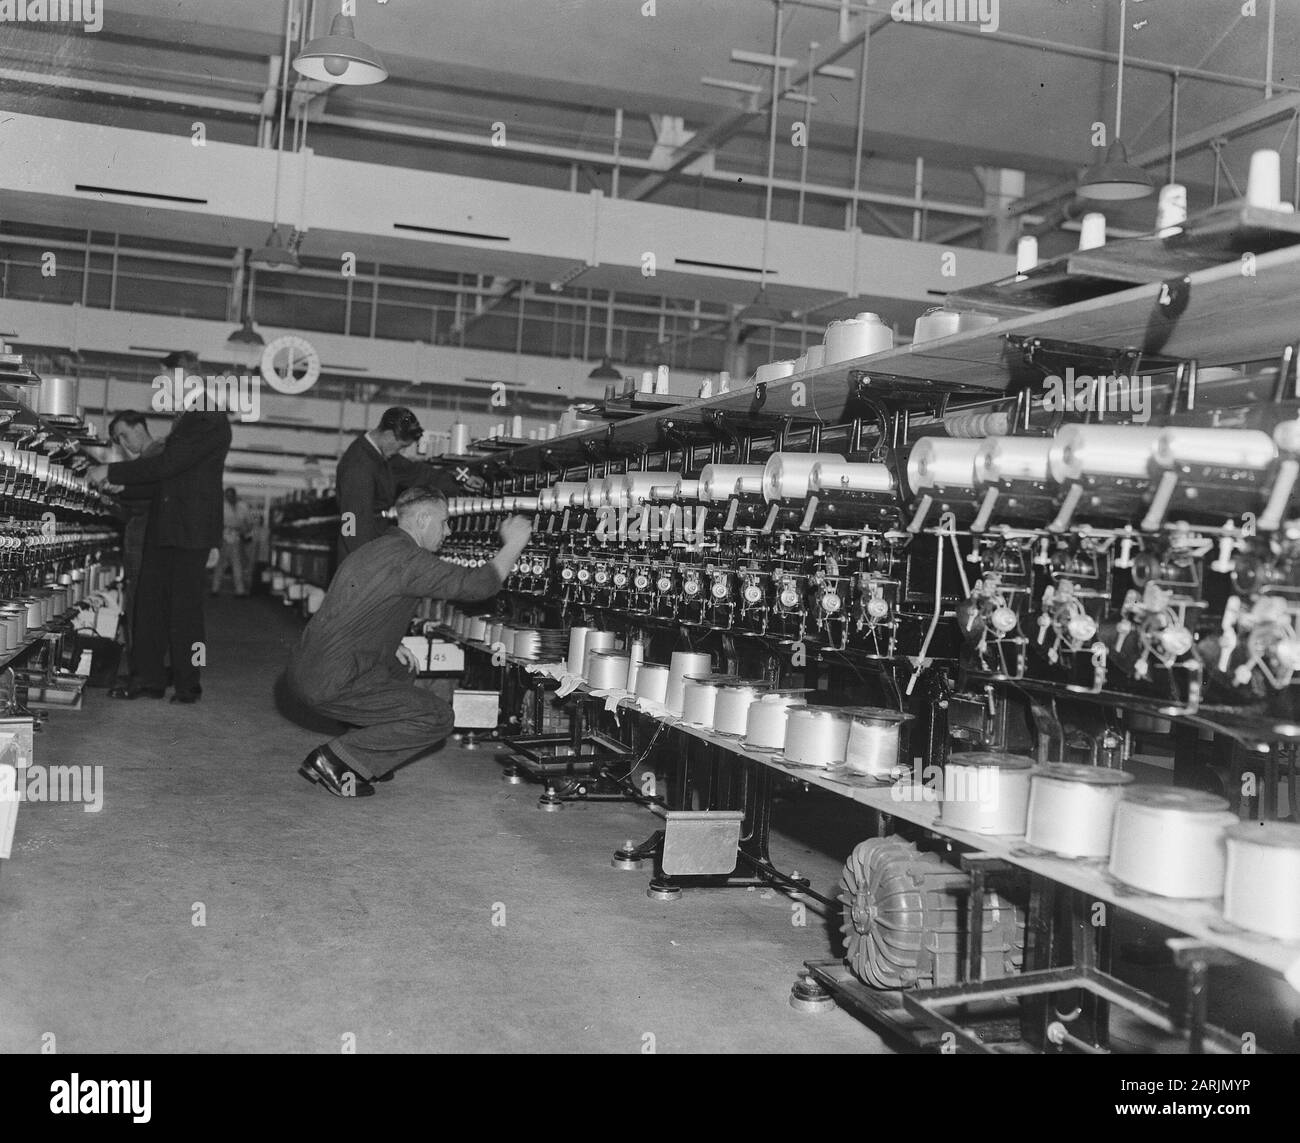 In the war-torn city of Arnhem, hard work is being done to build the art silk industry. This product so important for Dutch textile supply is manufactured here at the A.K.U. (Arnhem Kunstzijde Union). Spinning the yarns for shipping Annotation: Old number 902-1864 Date: 28 May 1947 Location: Arnhem Keywords: Industry, Textile Industry Stock Photo